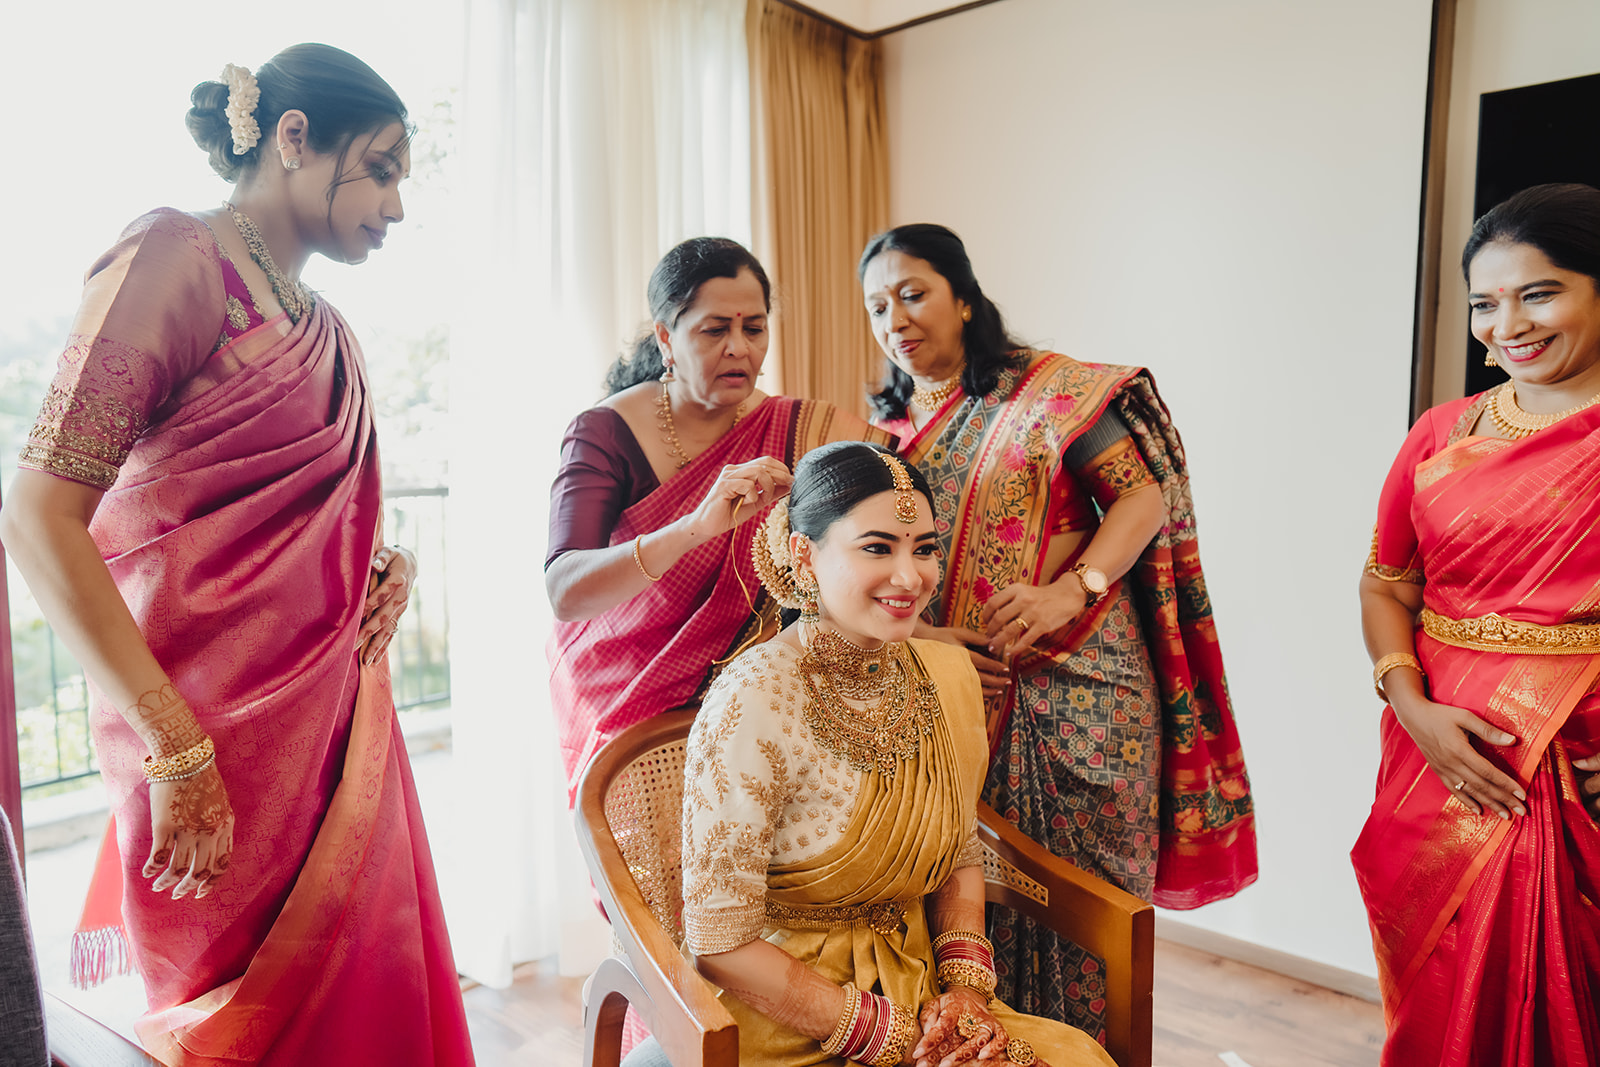 Guests and grace: The bride shines in the midst of joyful guests, creating memorable moments.